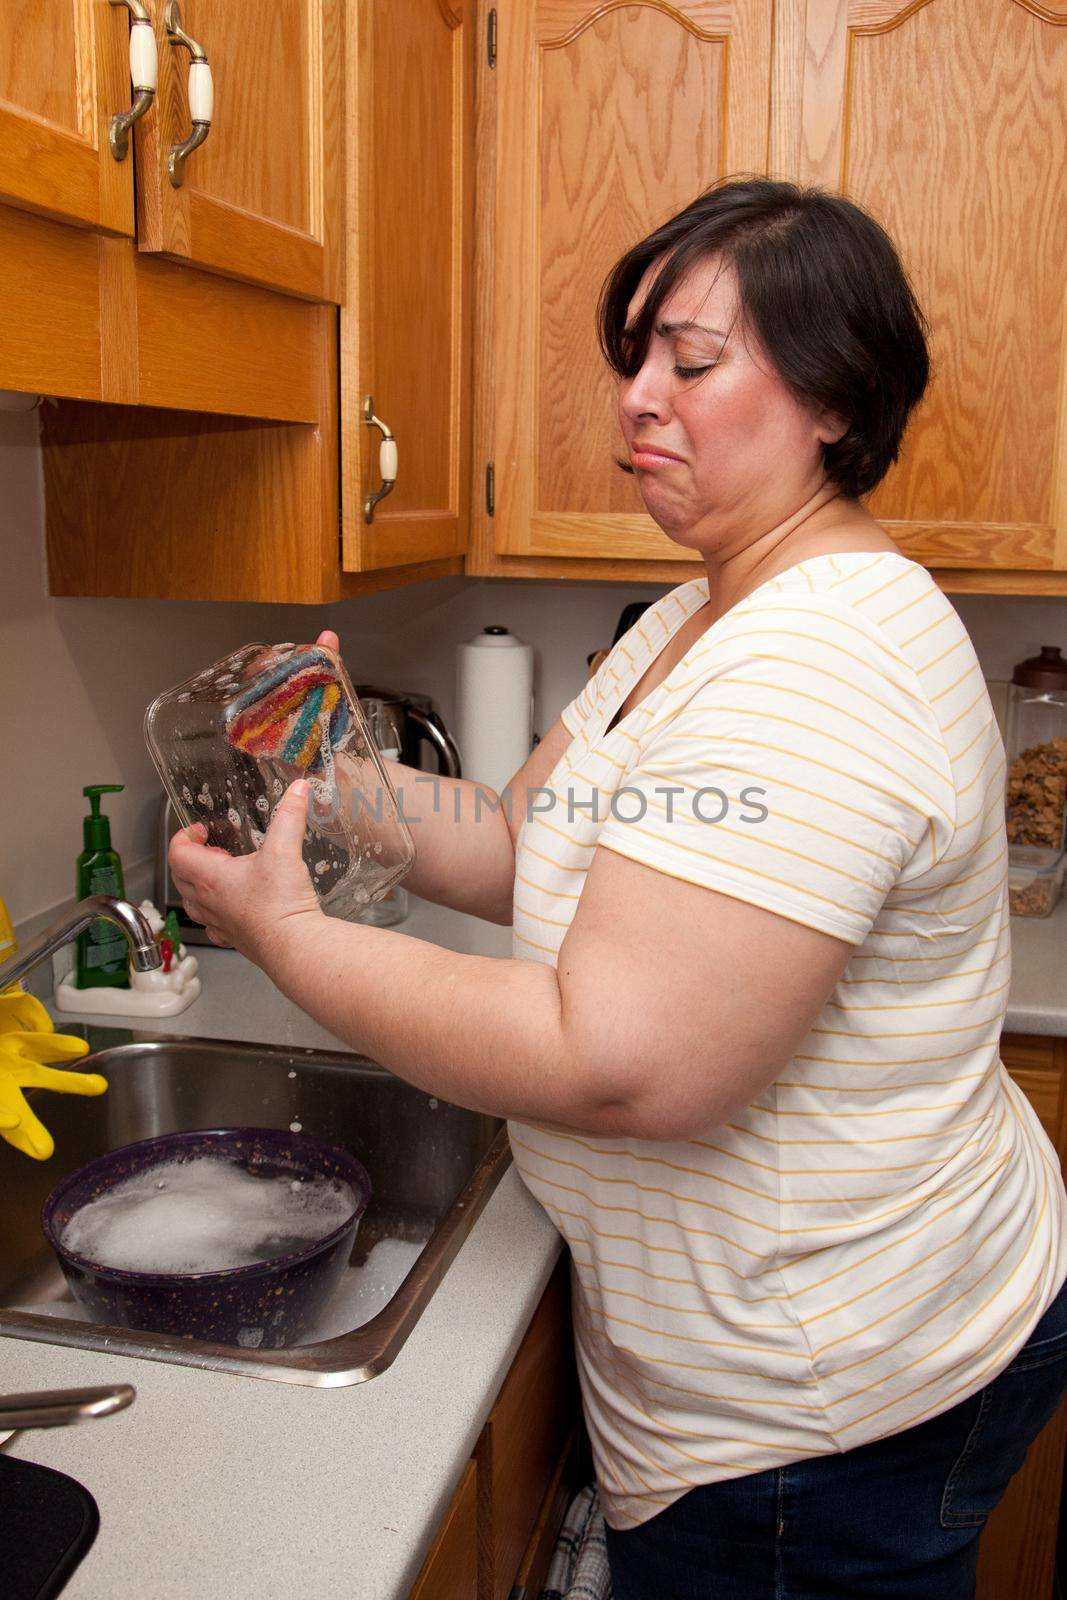 Woman makes a disgusted face as she cleans a glass dish in the kitchen 